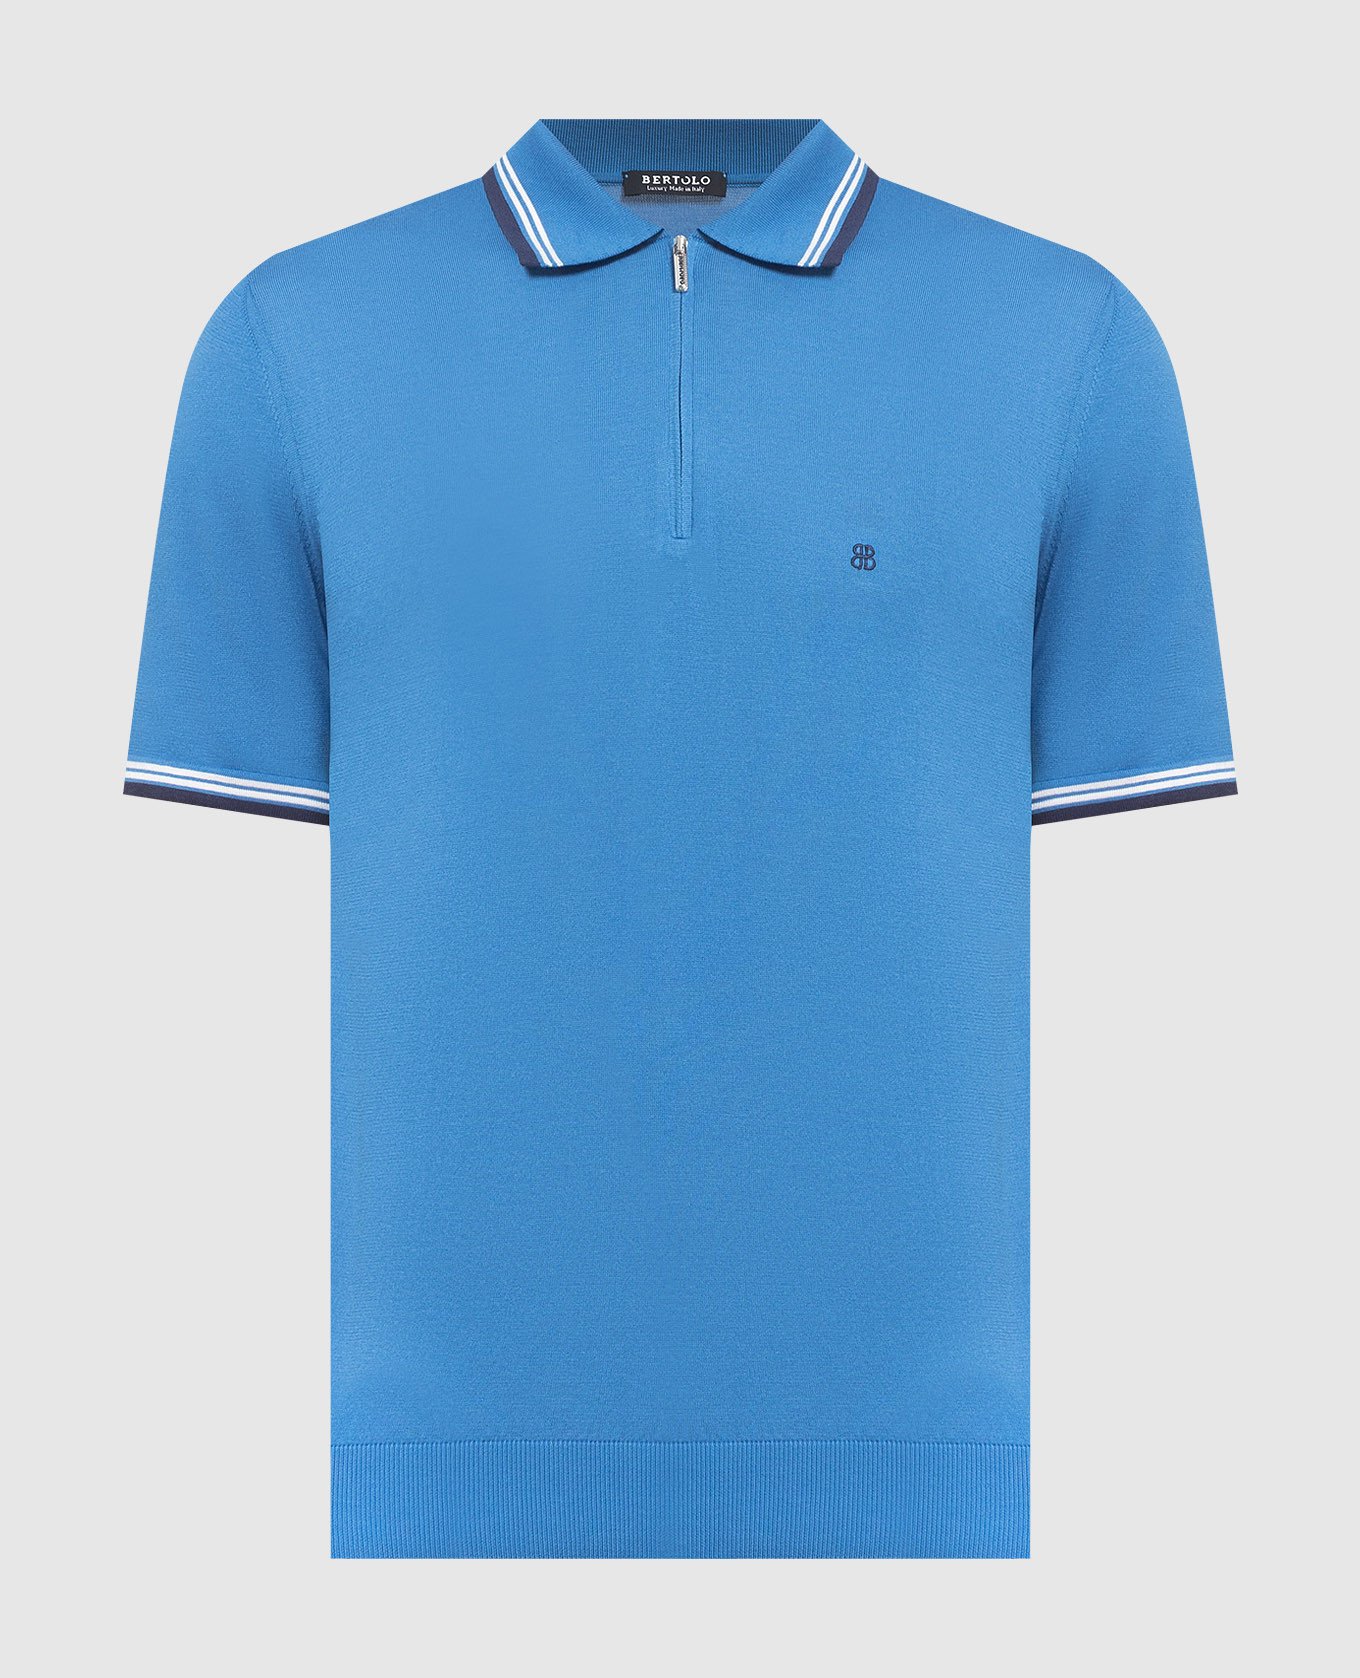 Bertolo Cashmere - Blue polo 902176002037 - Republic delivery at buy with with logo Czech Symbol embroidery